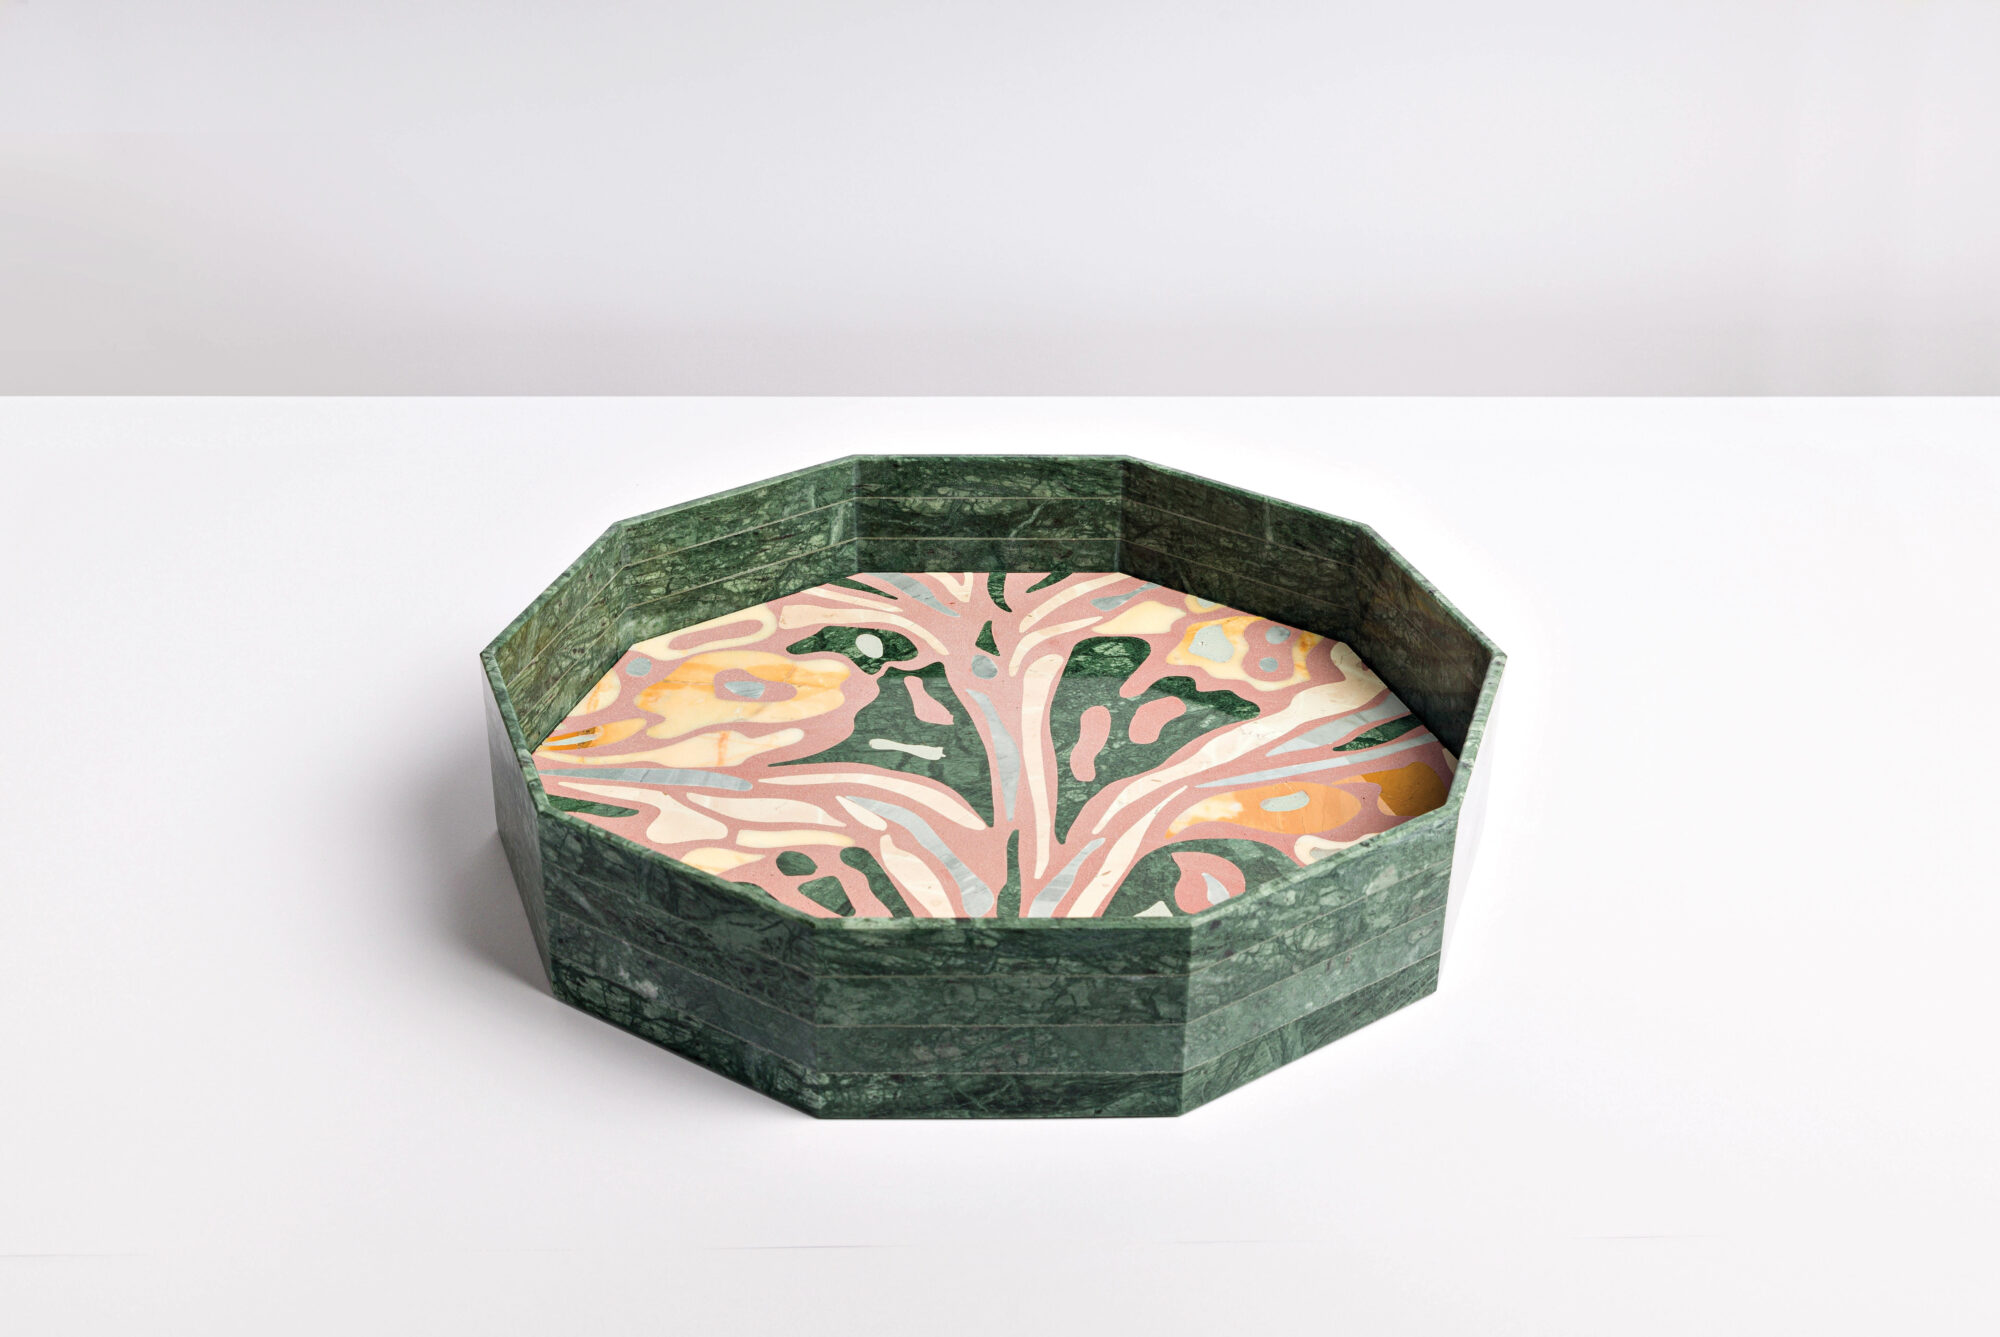 Decagonal plate with green-marble border from Artemest Galleria, part of the New York art scene